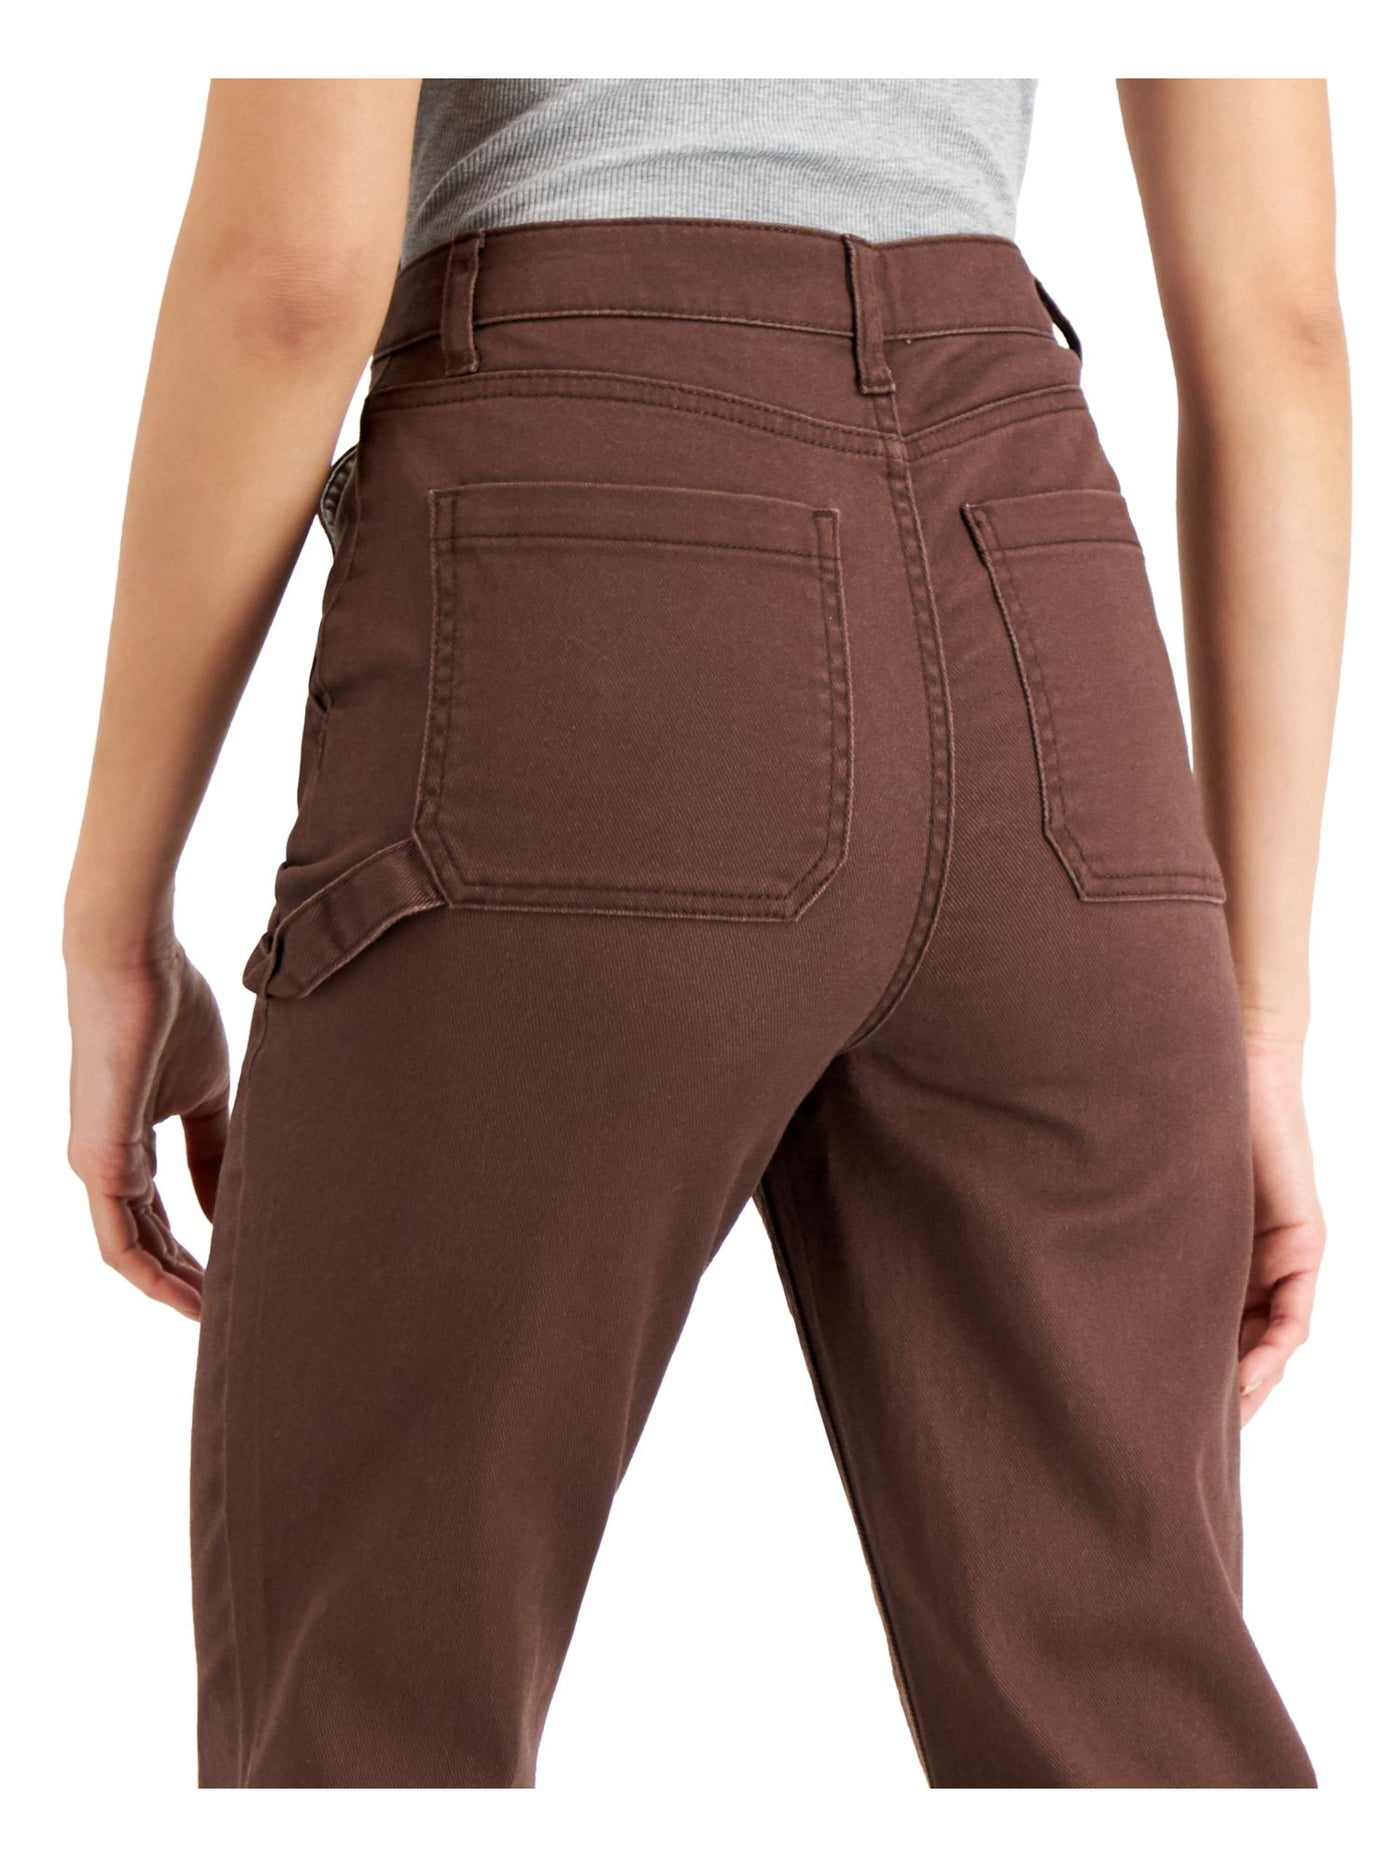 TINSELTOWN Womens Brown Stretch Pocketed Zippered Baggy Hi-rise Carpenter Straight leg Jeans 13